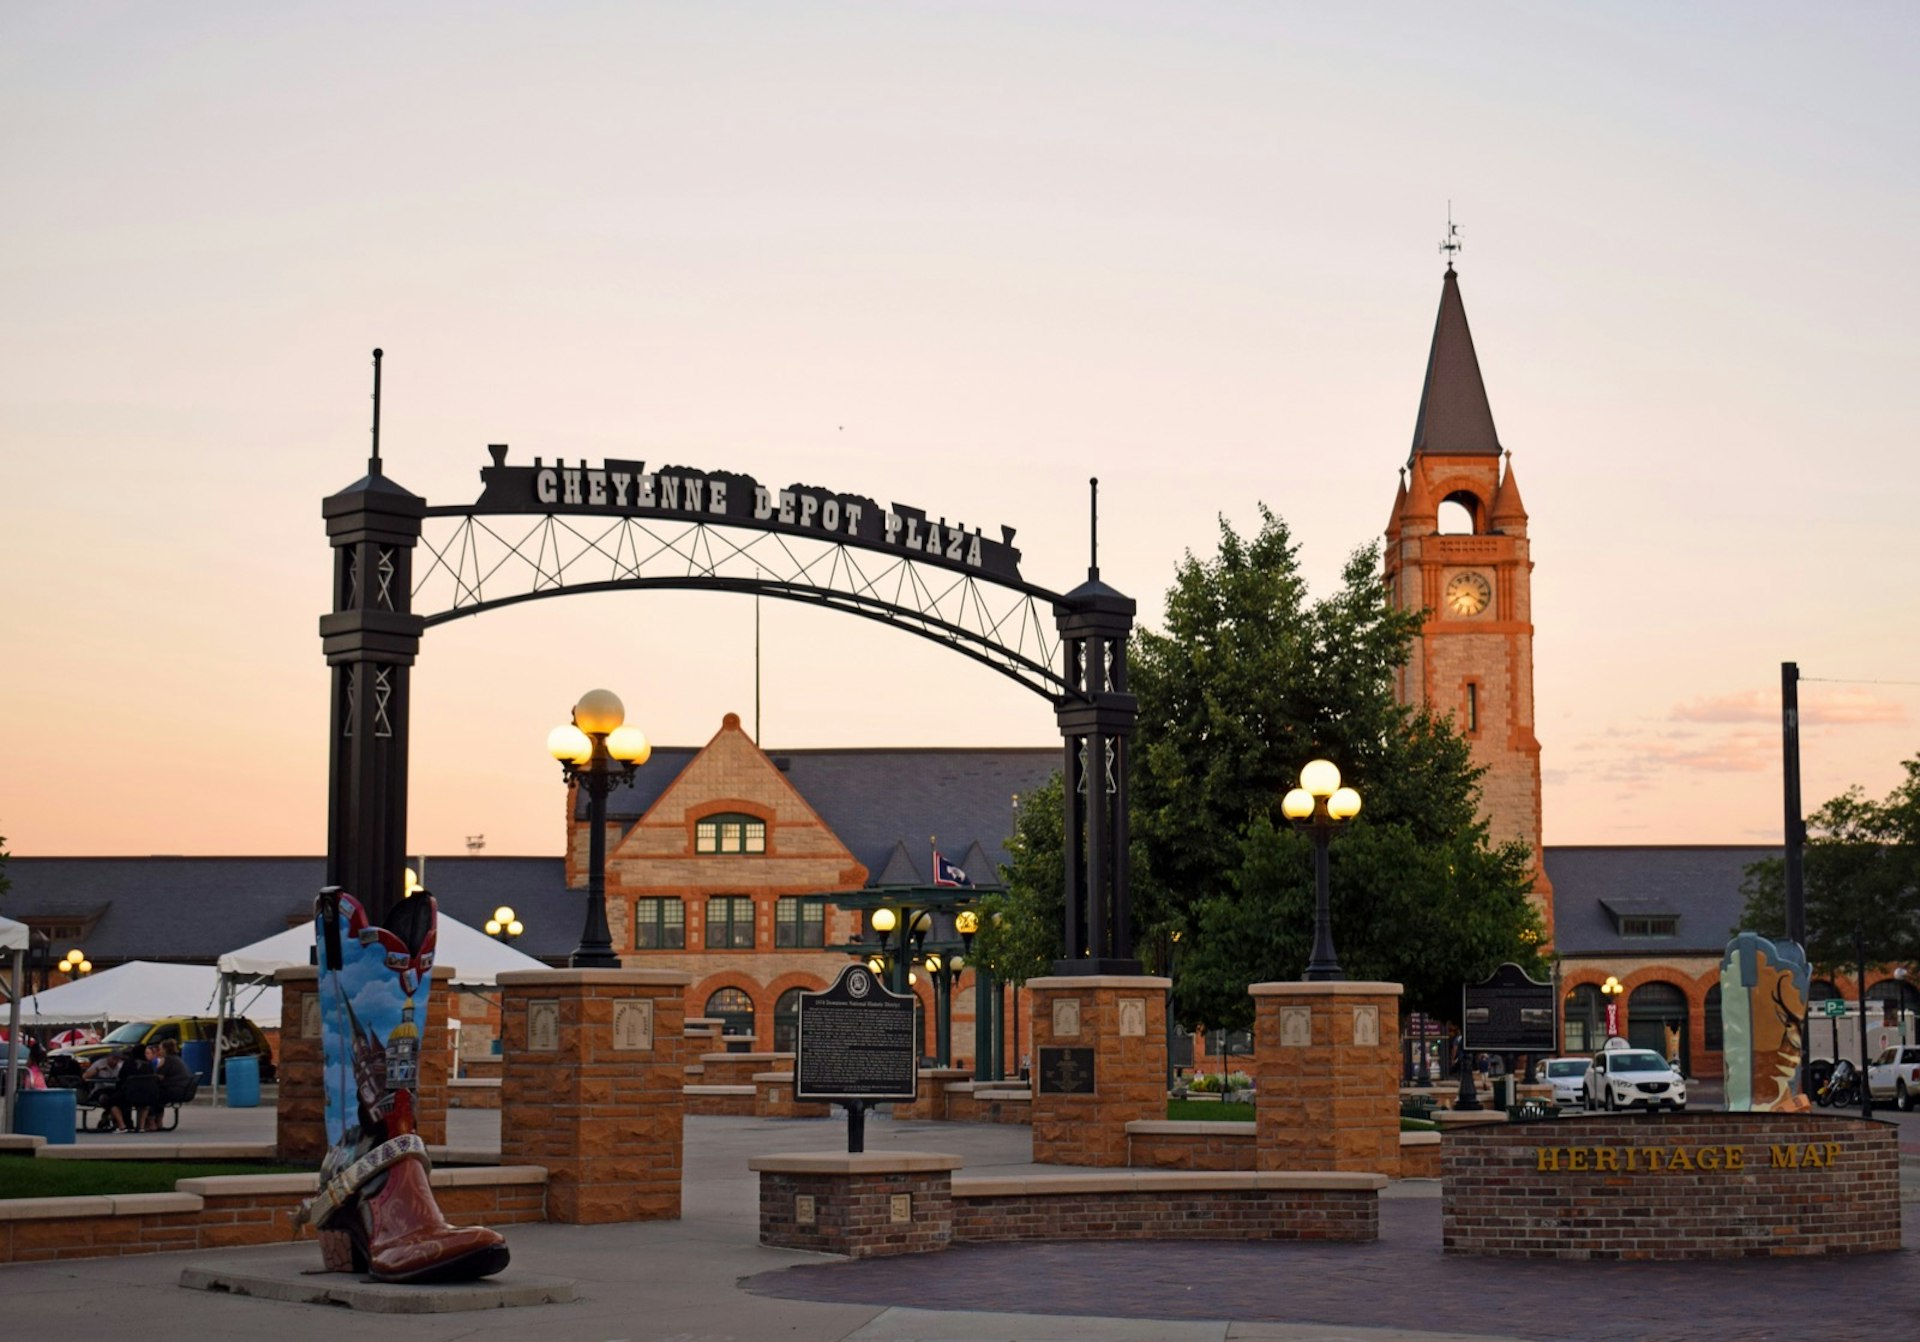 Buildings and a plaza glow in the warmth of a sunset, with a train-shaped sign and oversized cowboy-boot sculpture in Cheyenne, Wyoming © Dave Parfitt / Lonely Planet